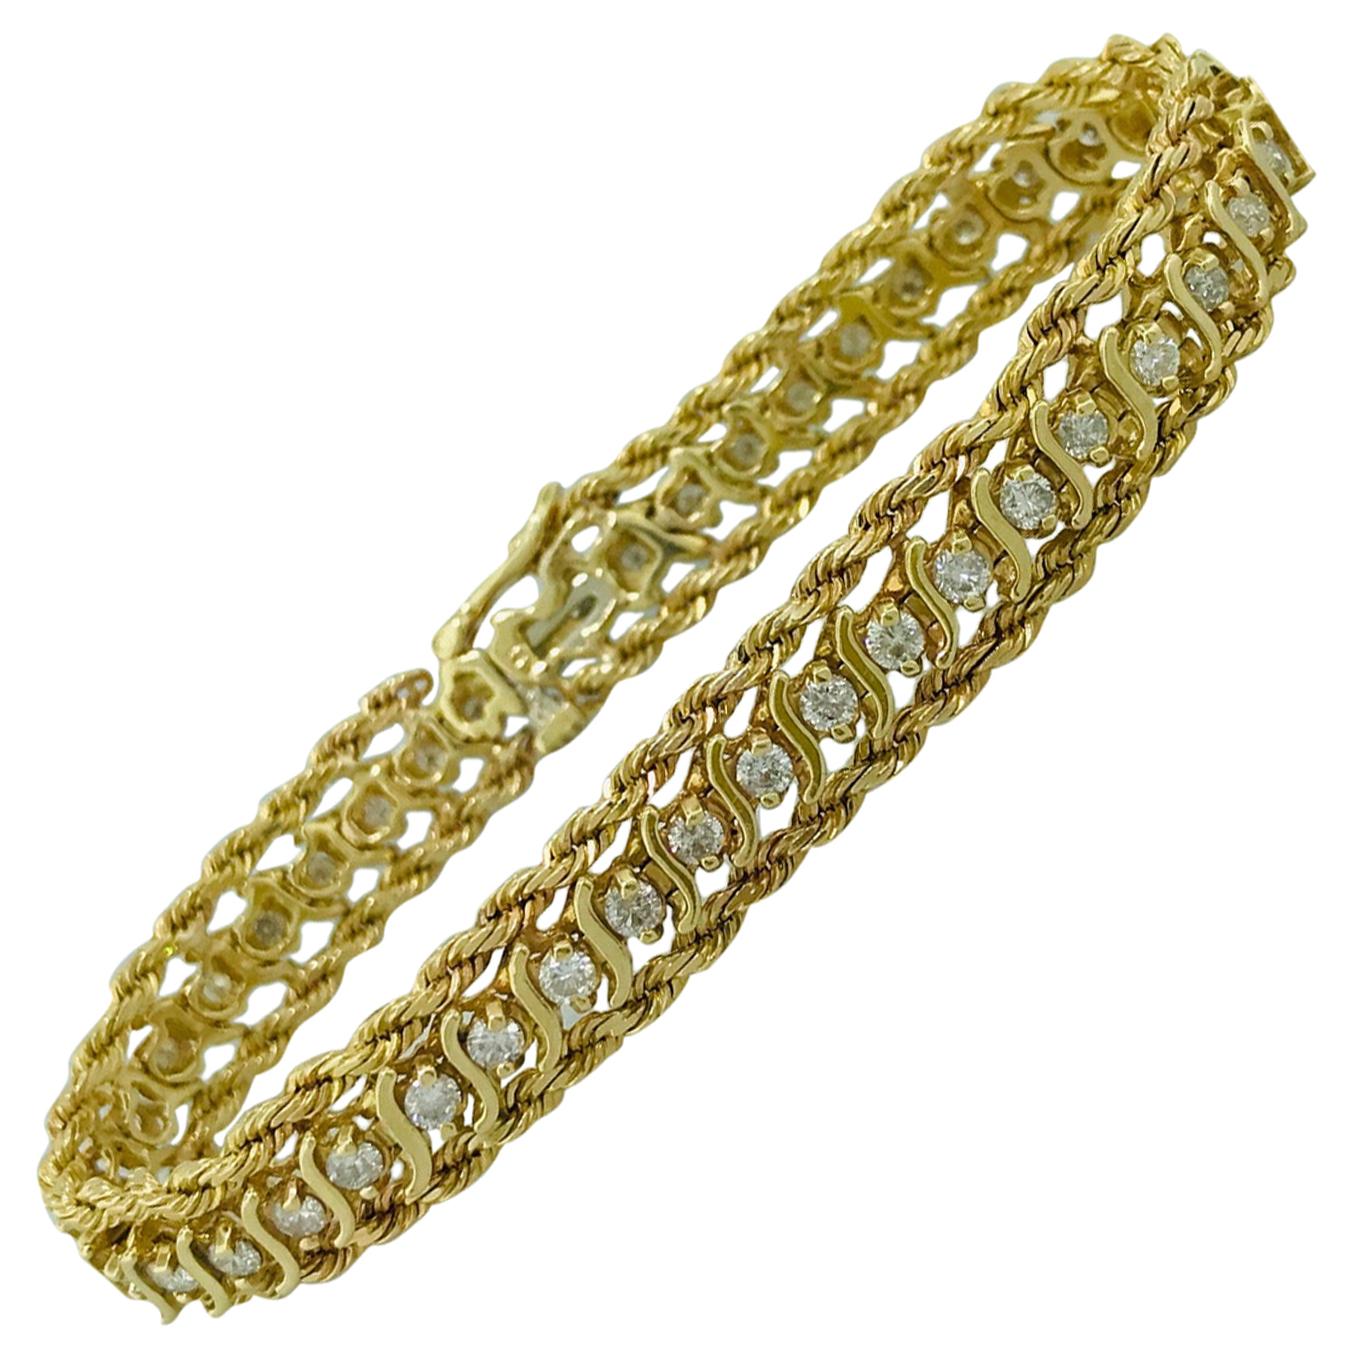 1.00 Carat Diamond Tennis Bracelet with 14K Yellow Gold Rope Chain, F-G Color